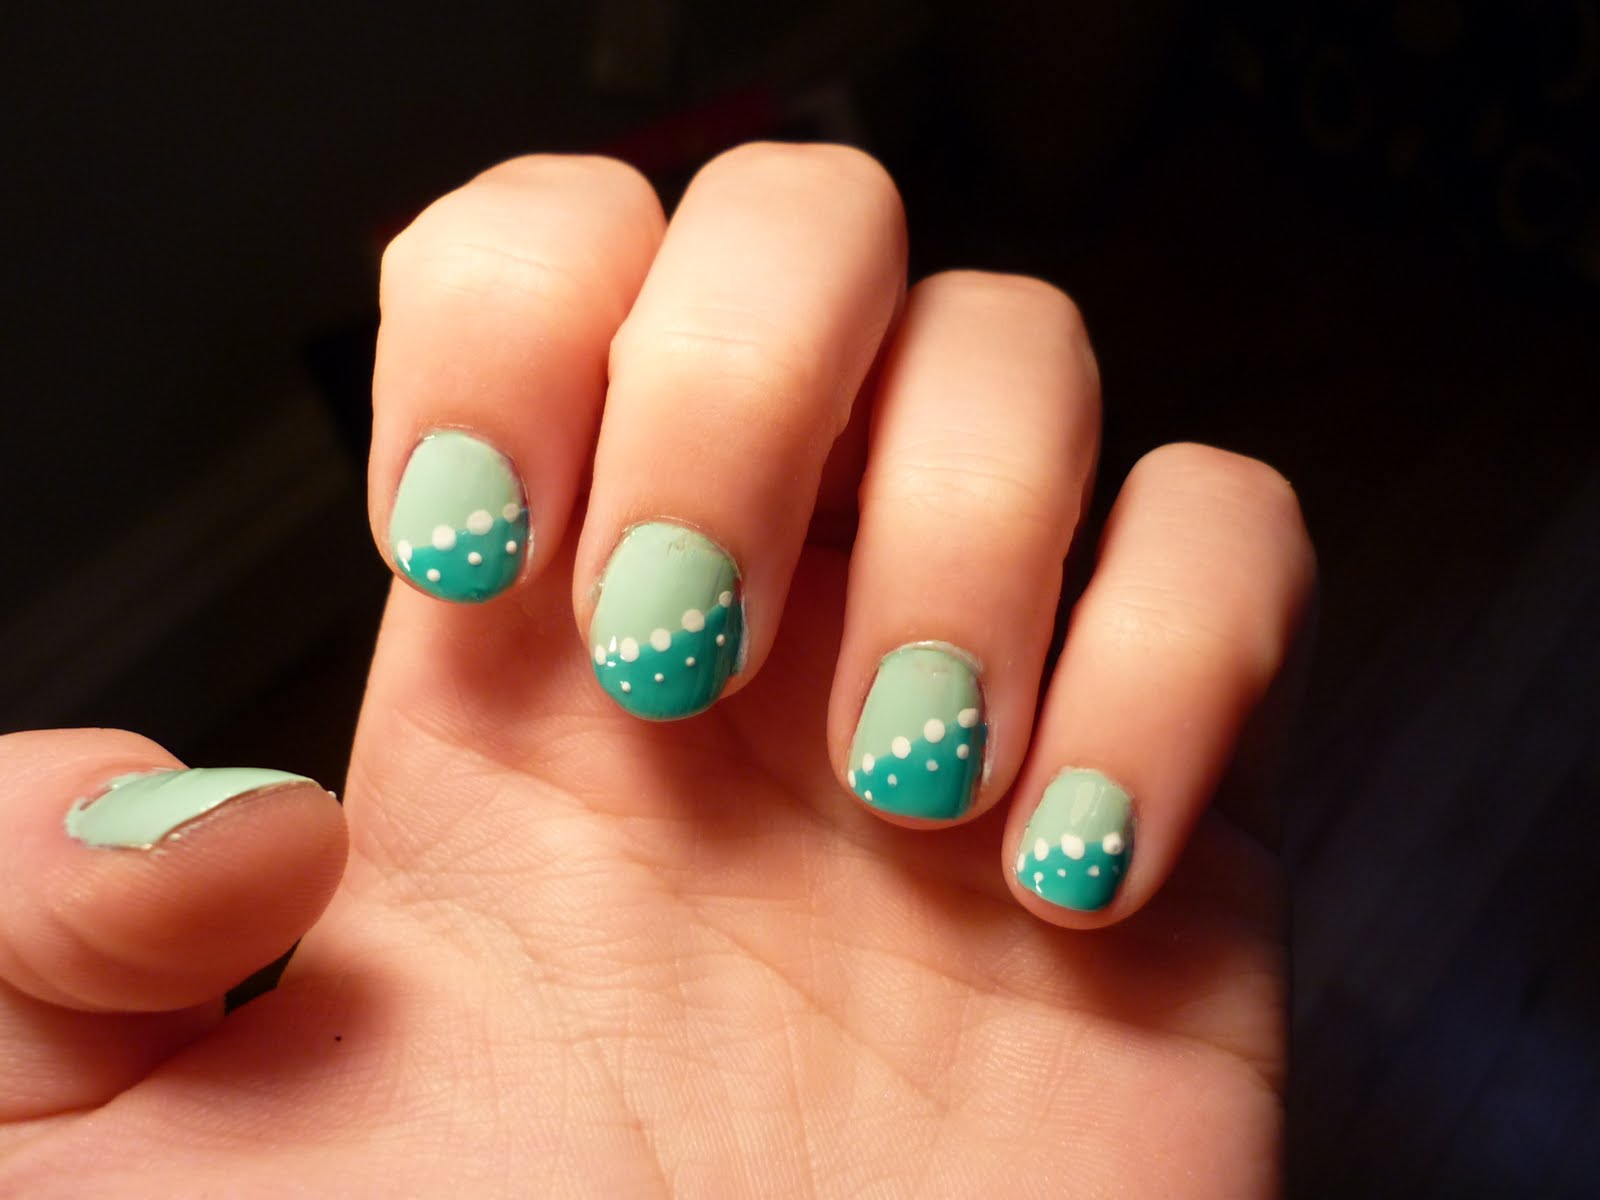 1. Easy Nail Art Designs for Beginners Using Nail Polish - wide 3